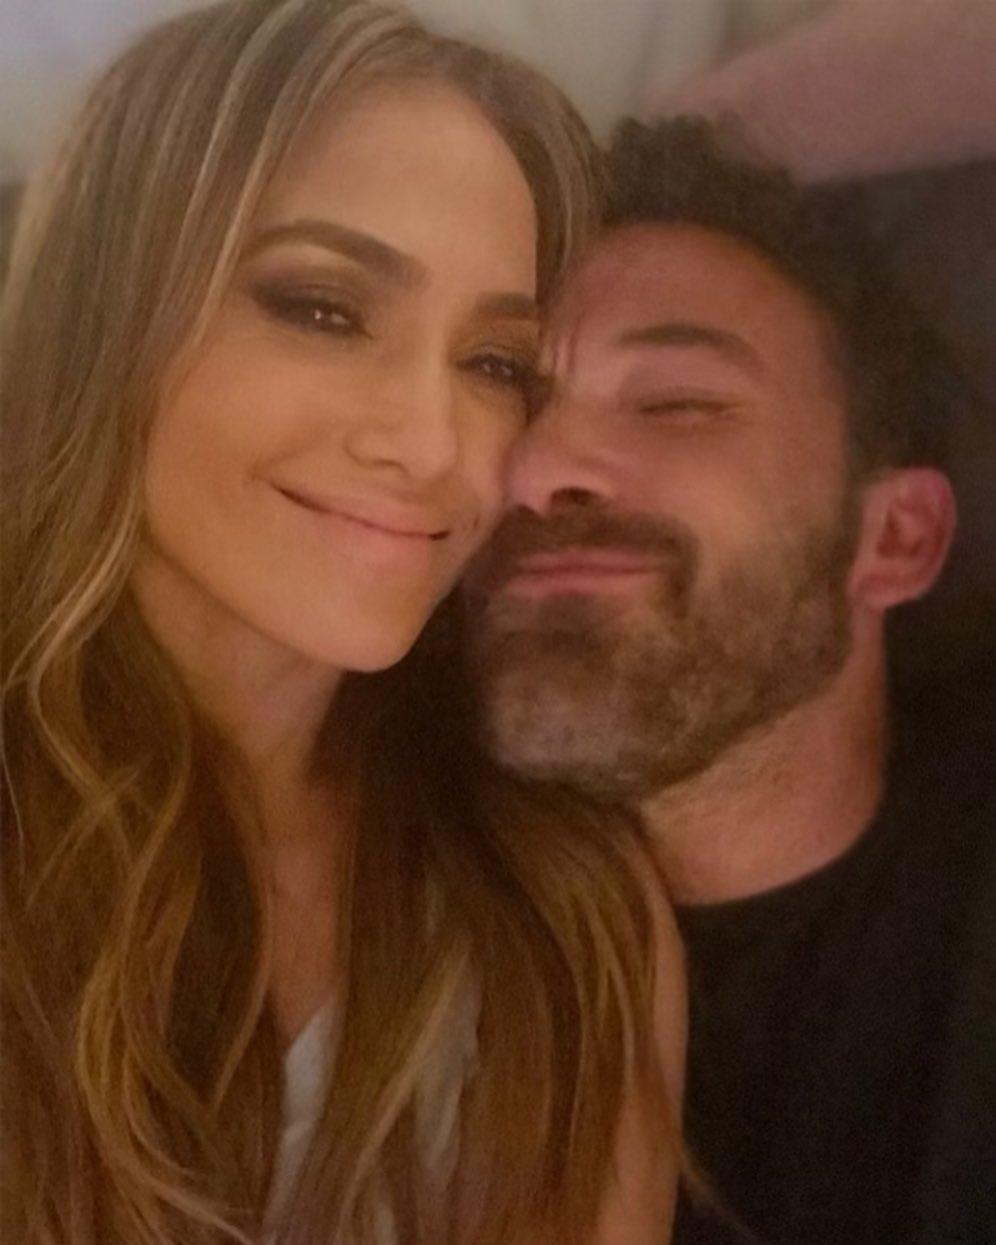 JLo celebrates Father's Day with shirtless thirst trap of Ben Affleck